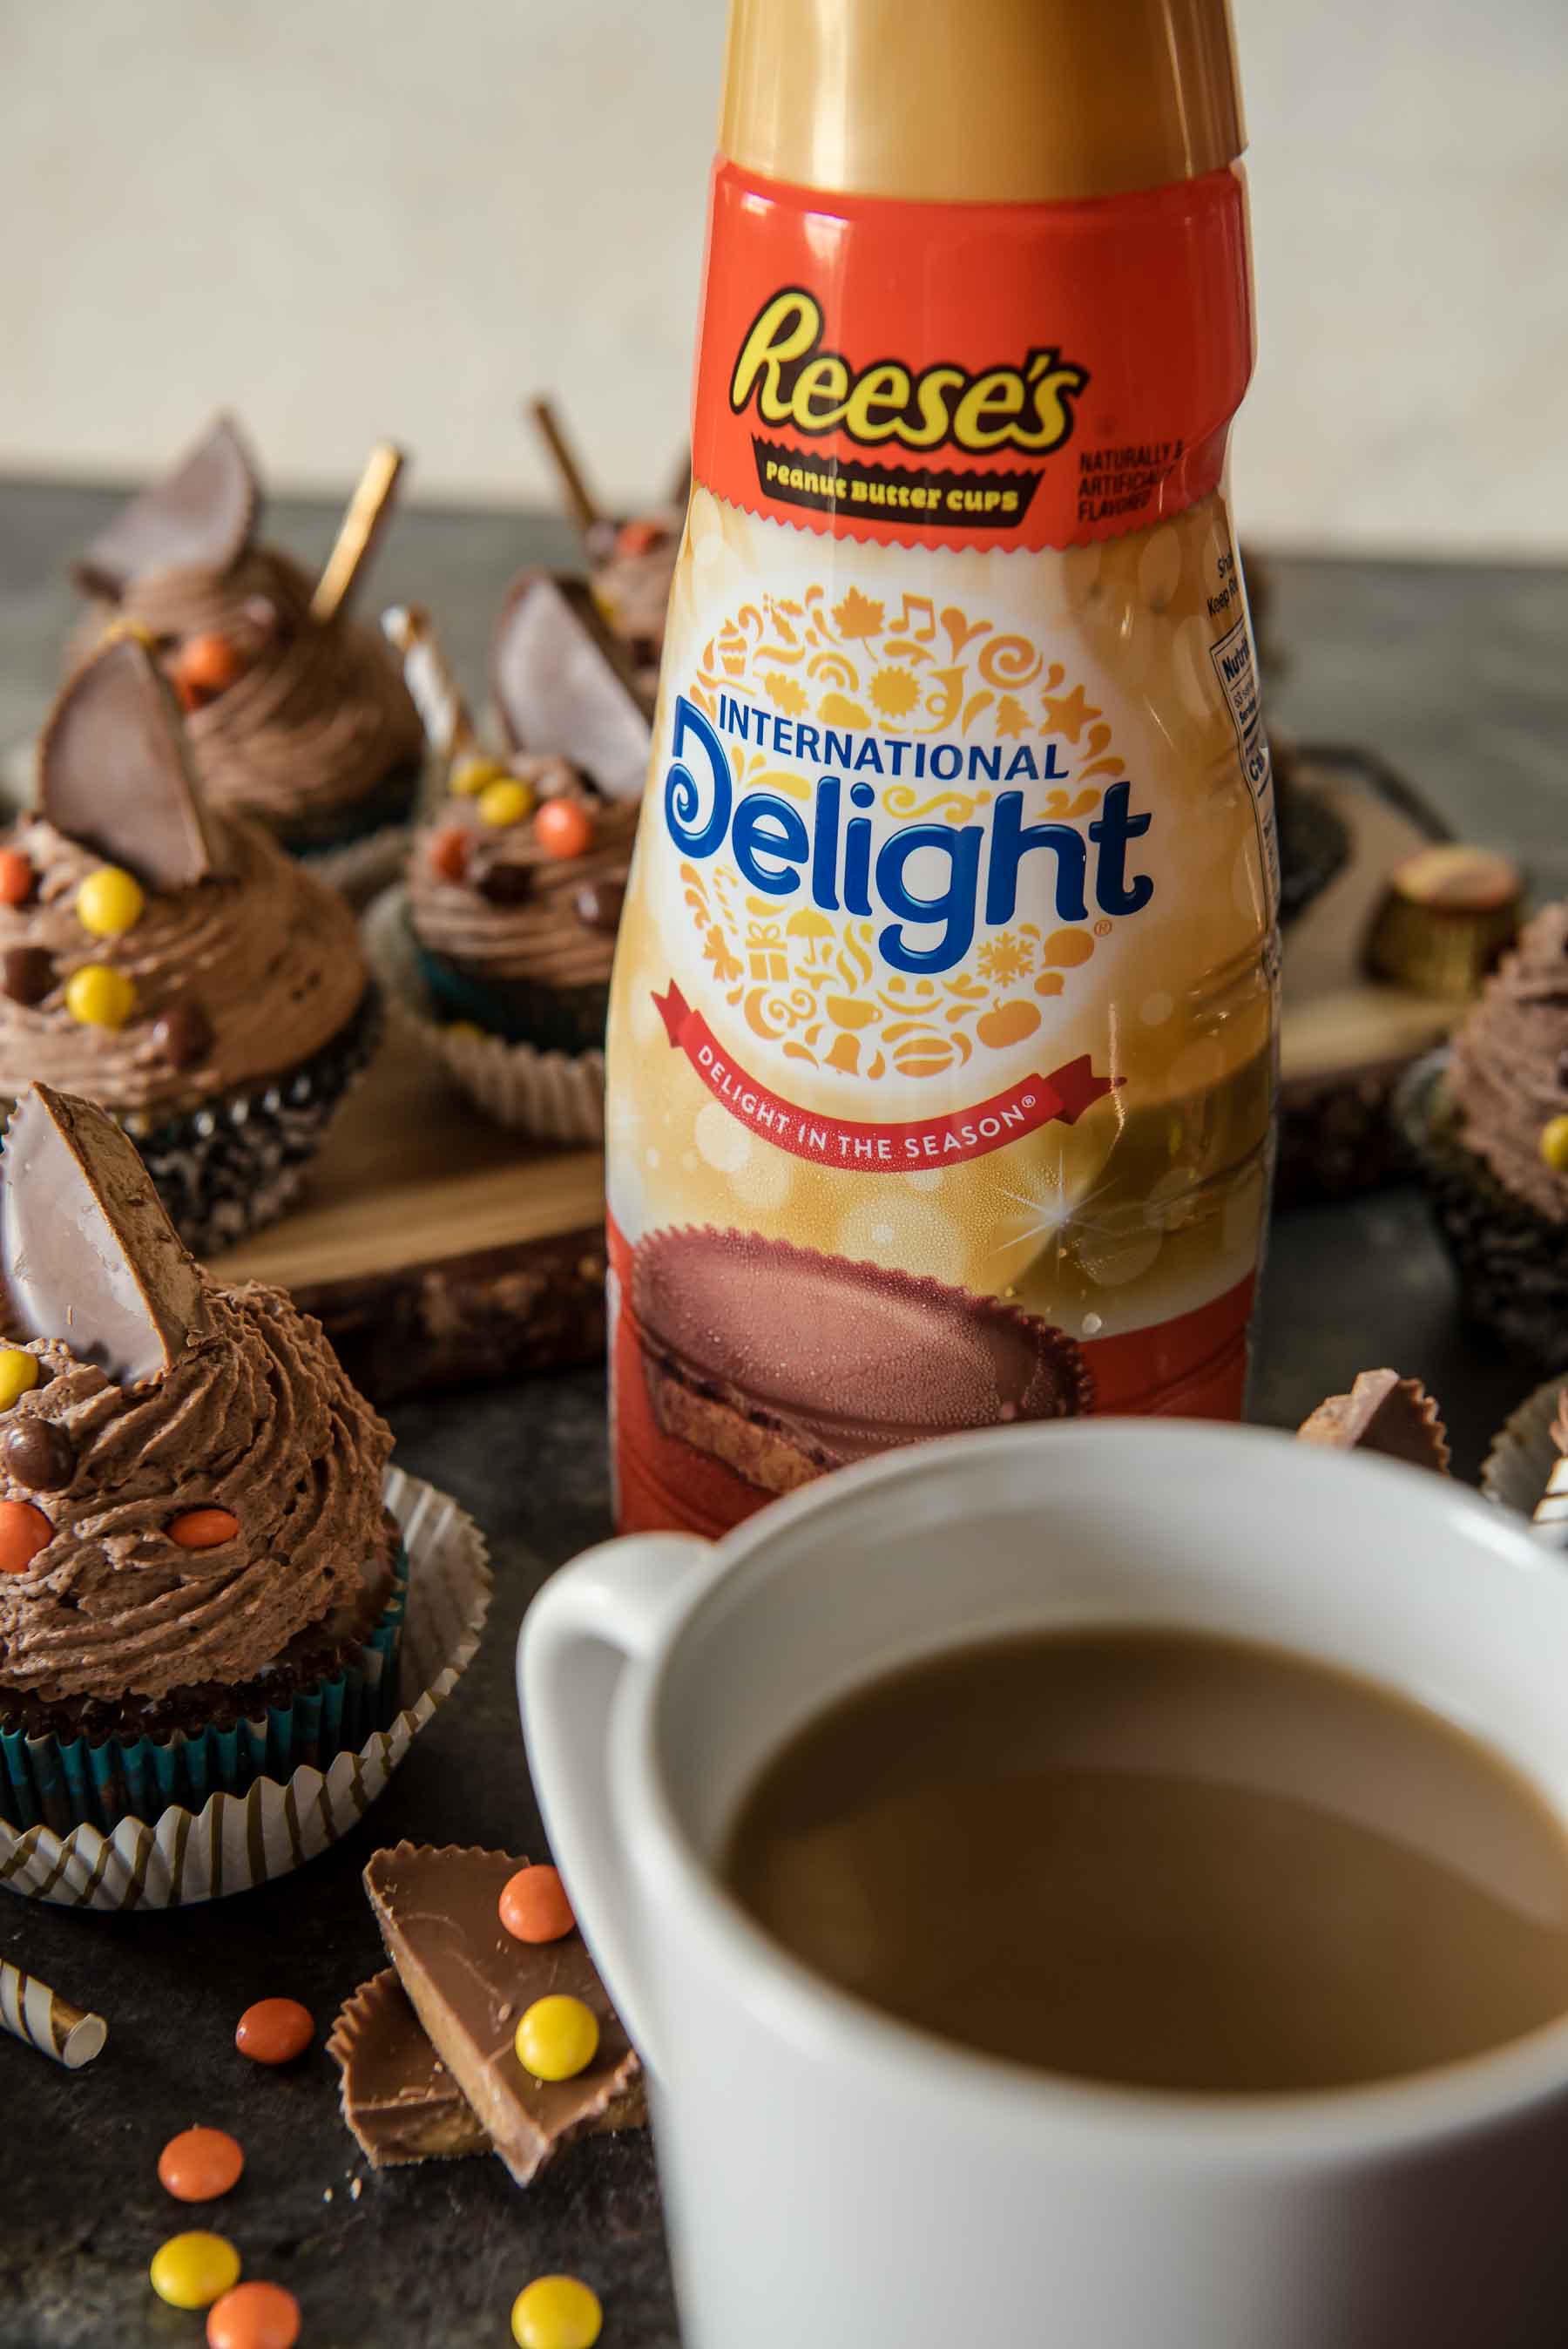 These super-moist, delicious Ultimate Reese's Tres Leches Cupcakes take classic tres leches cake, shrink it down, and add a fun peanut butter twist! The ganache and chocolate whipped cream truly make these treats irresistible!